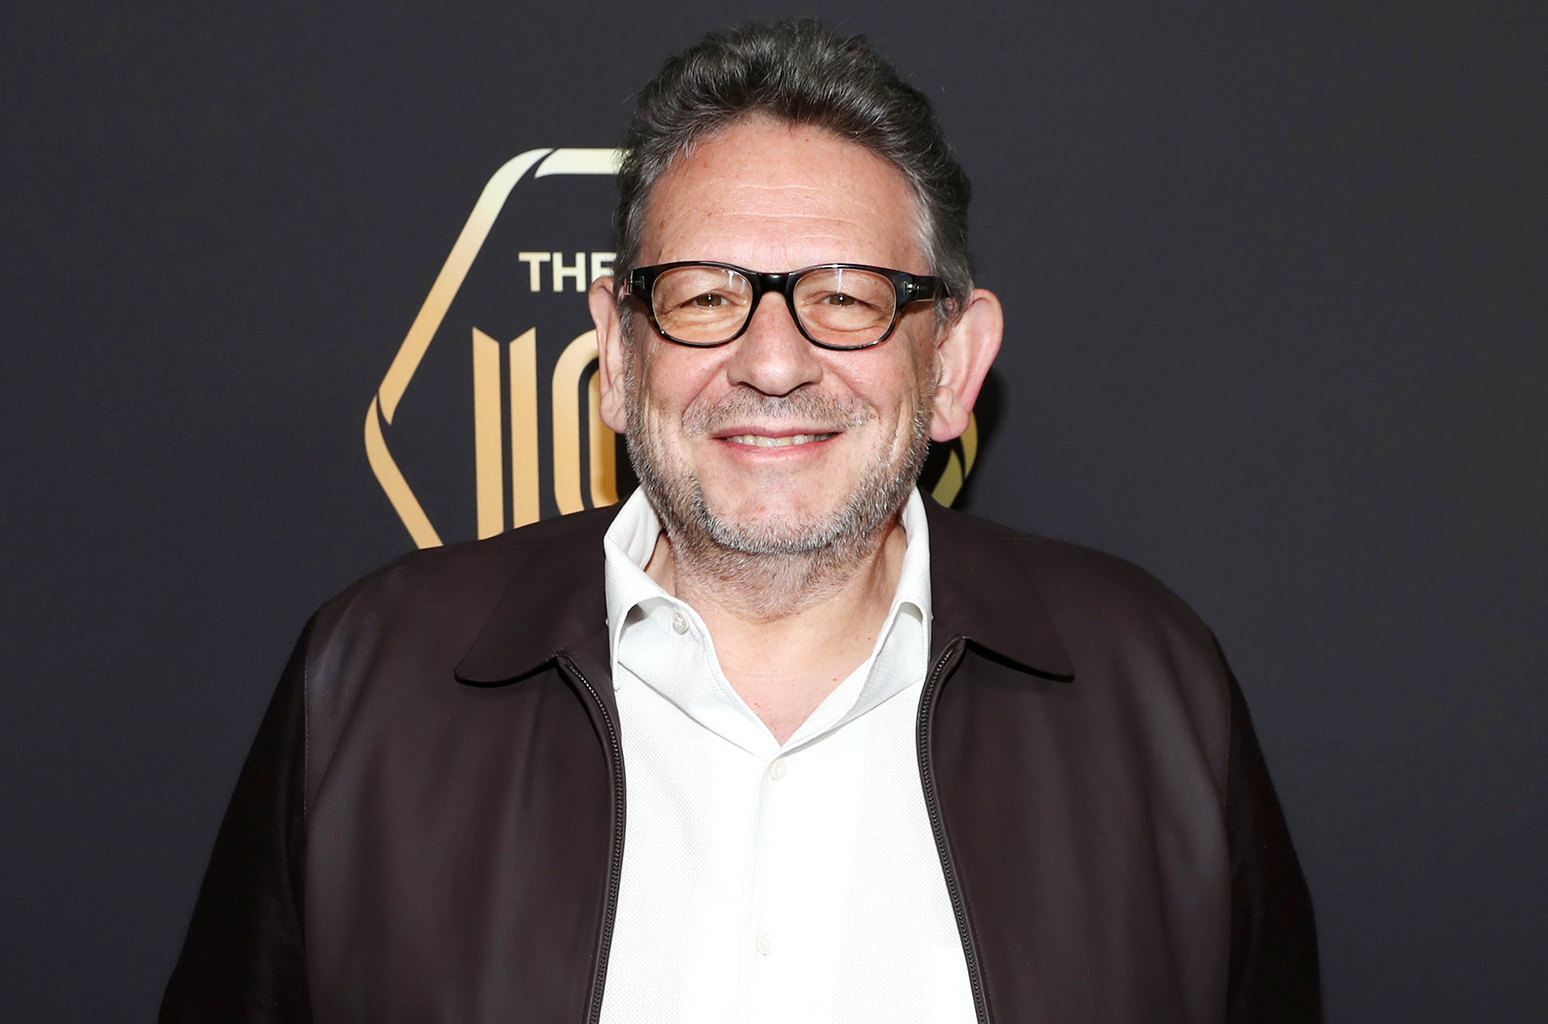 UMG CEO Lucian Grainge Calls Tencent Deal 'Strong Validation of Our Business Strategy' - www.billboard.com